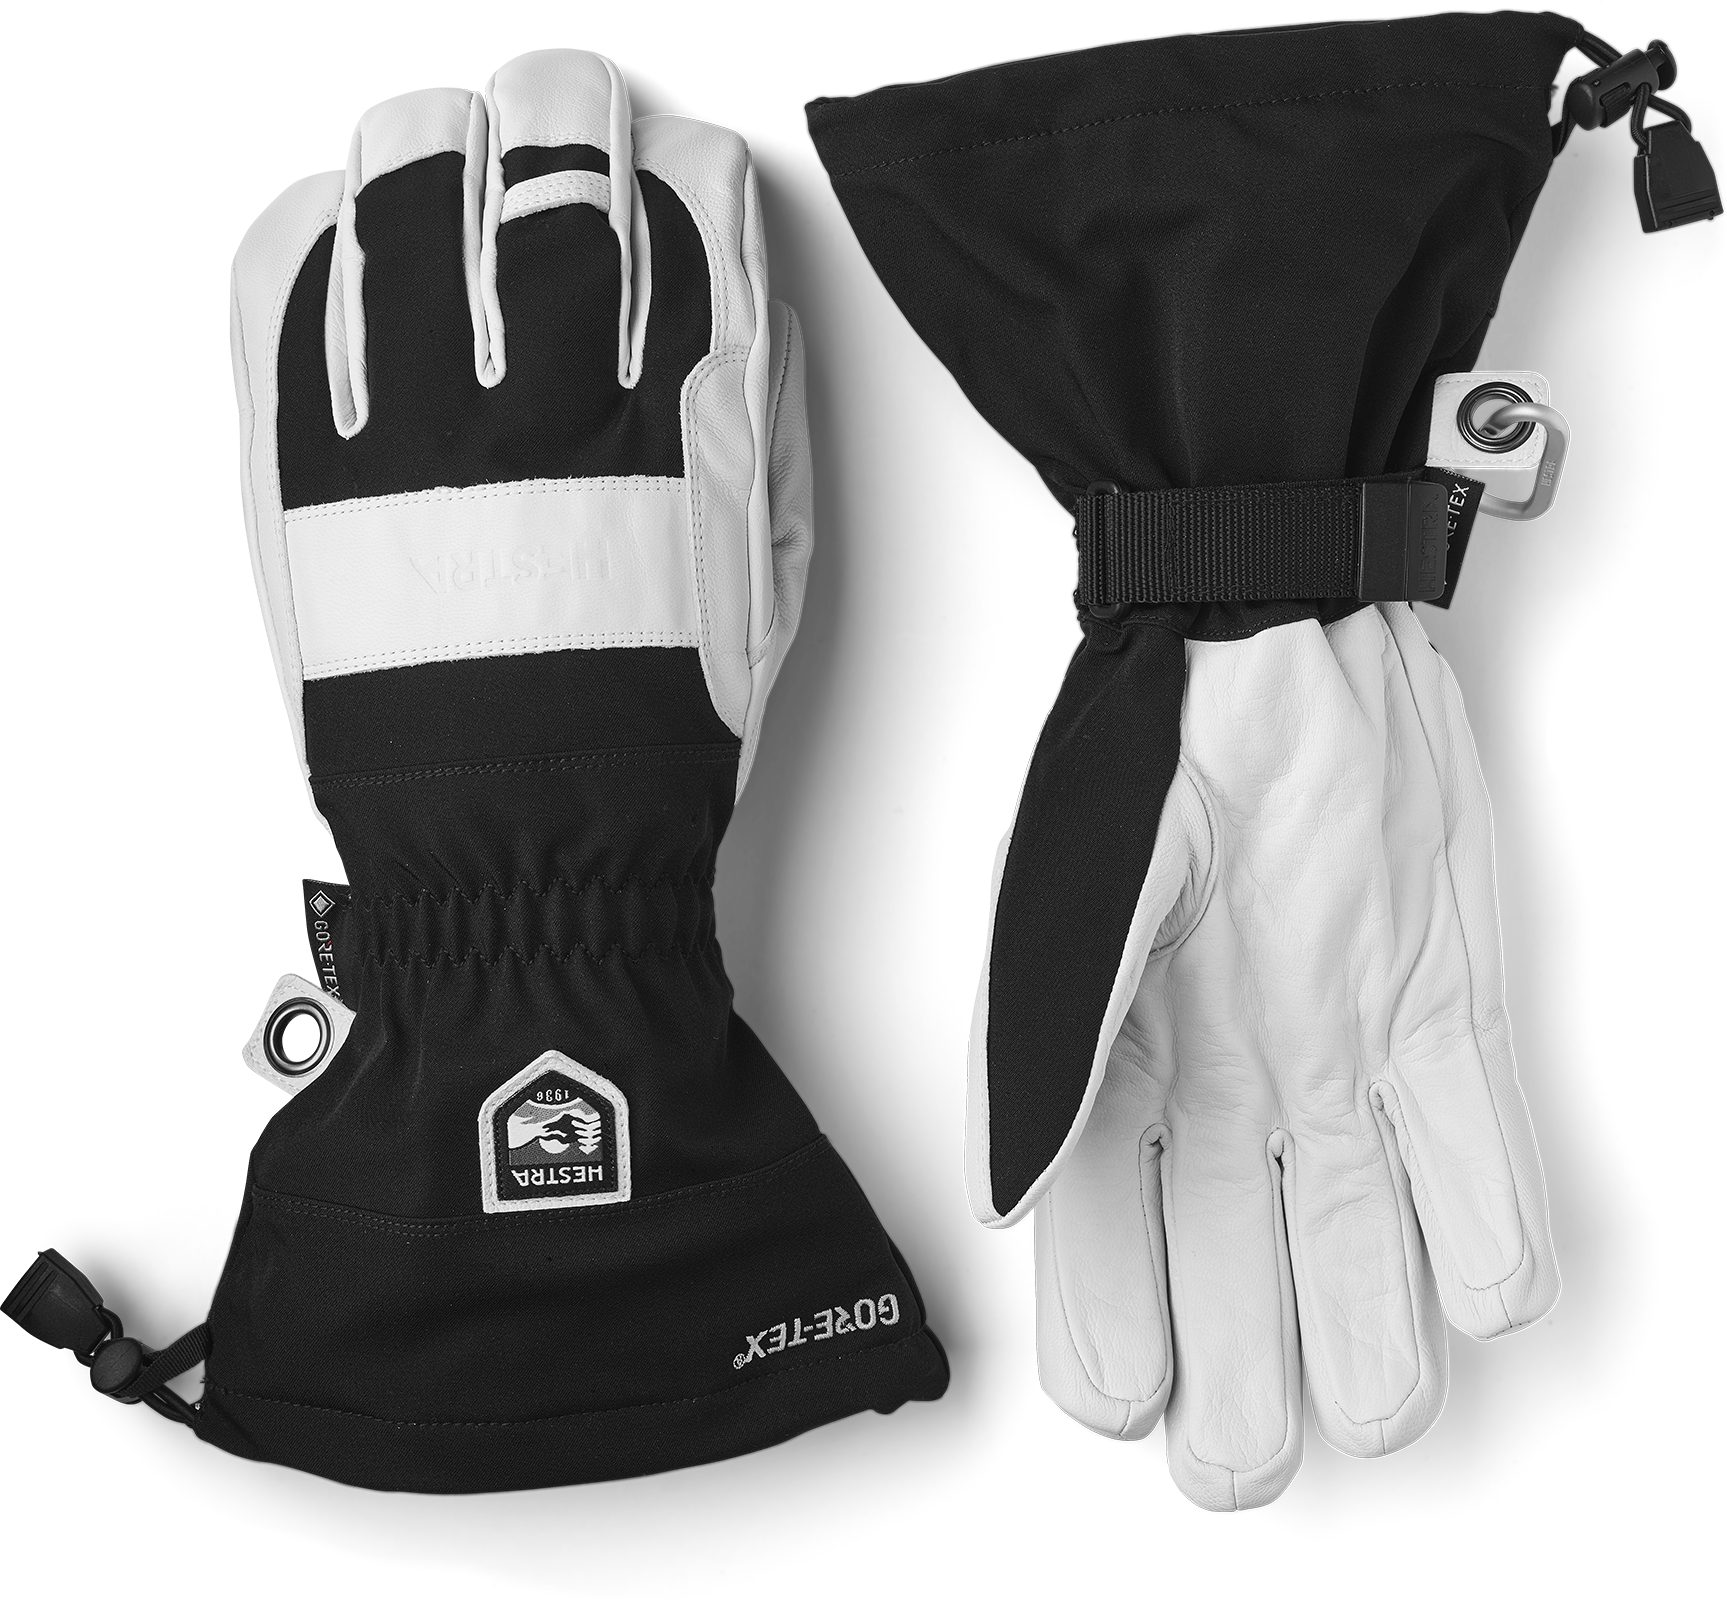 Hestra Army Leather Gore-TEX Short Black/Offwhite Close Fitting 5-Finger Snow Glove for Skiing and Mountaineering Waterproof 10 